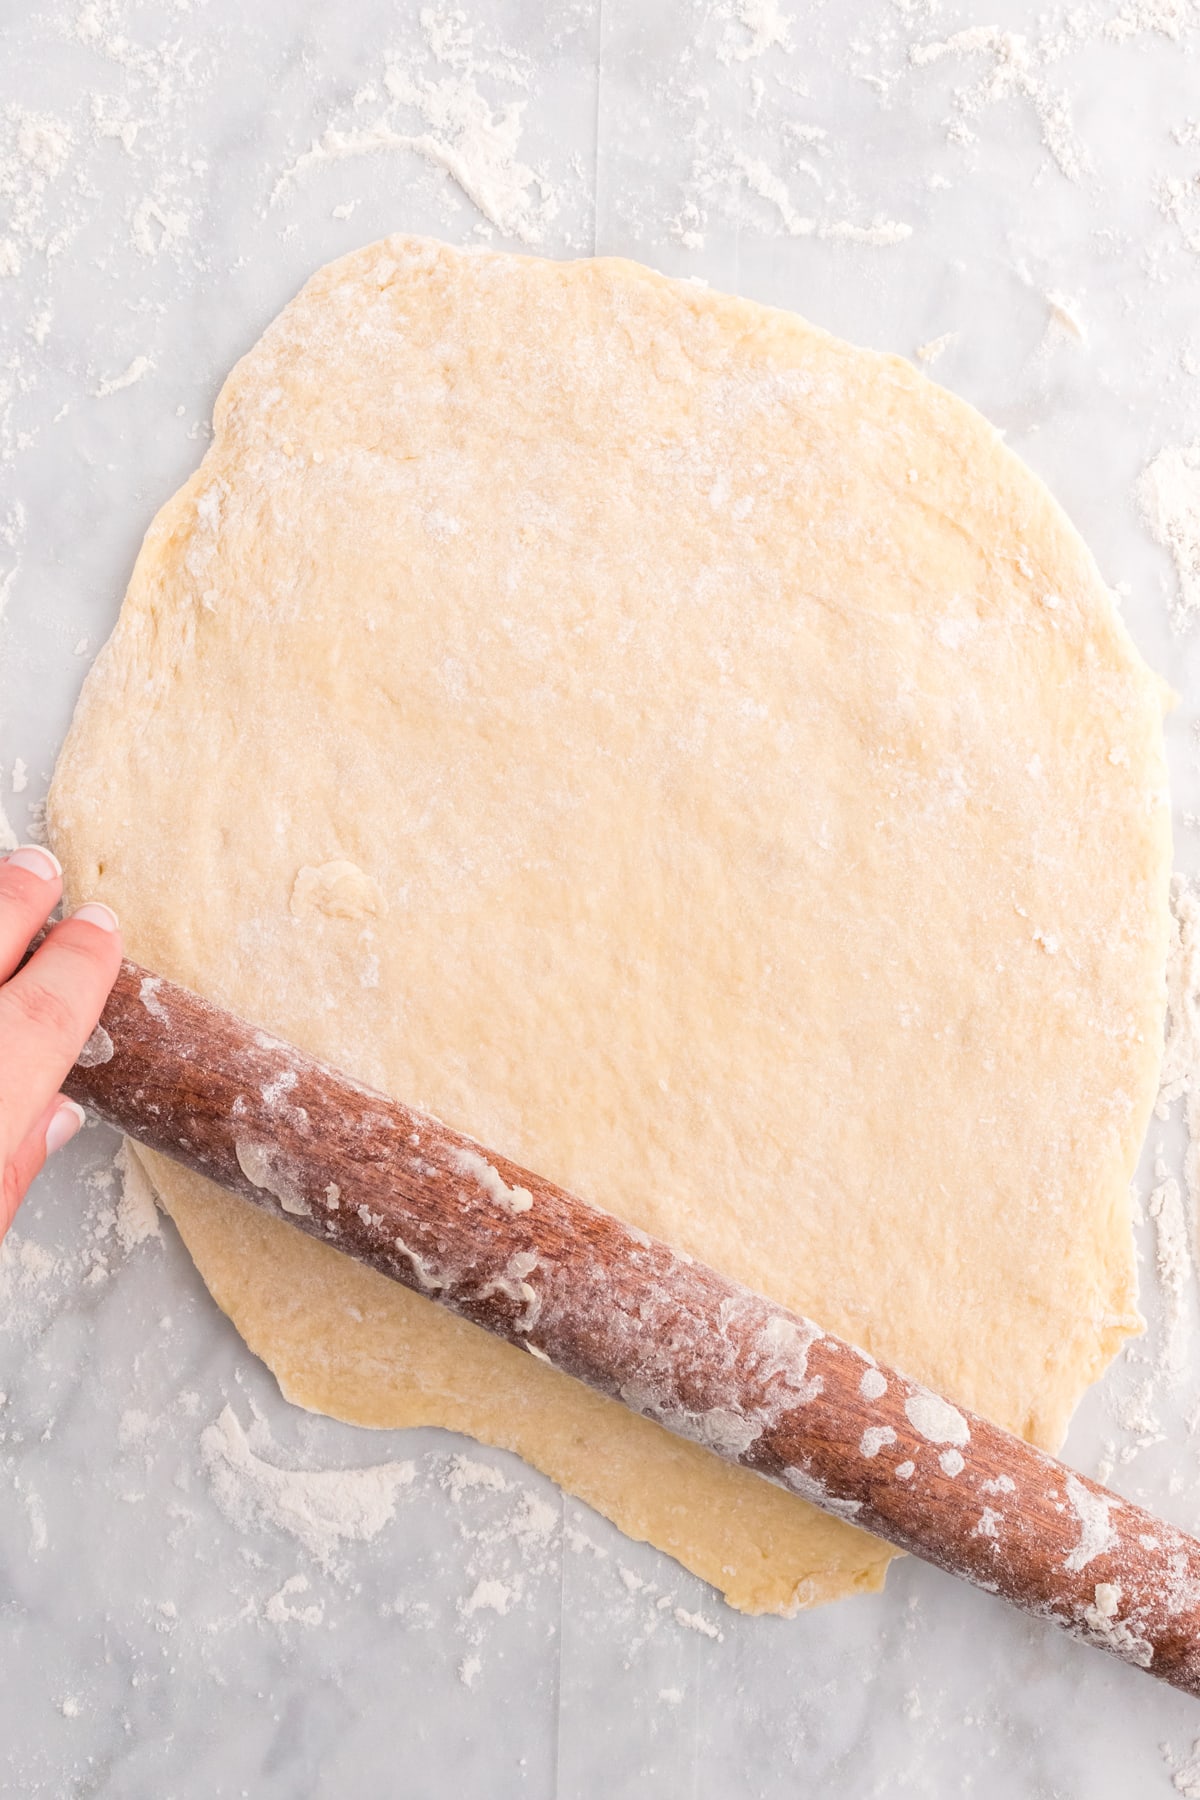 A rolling pin rolling out dough